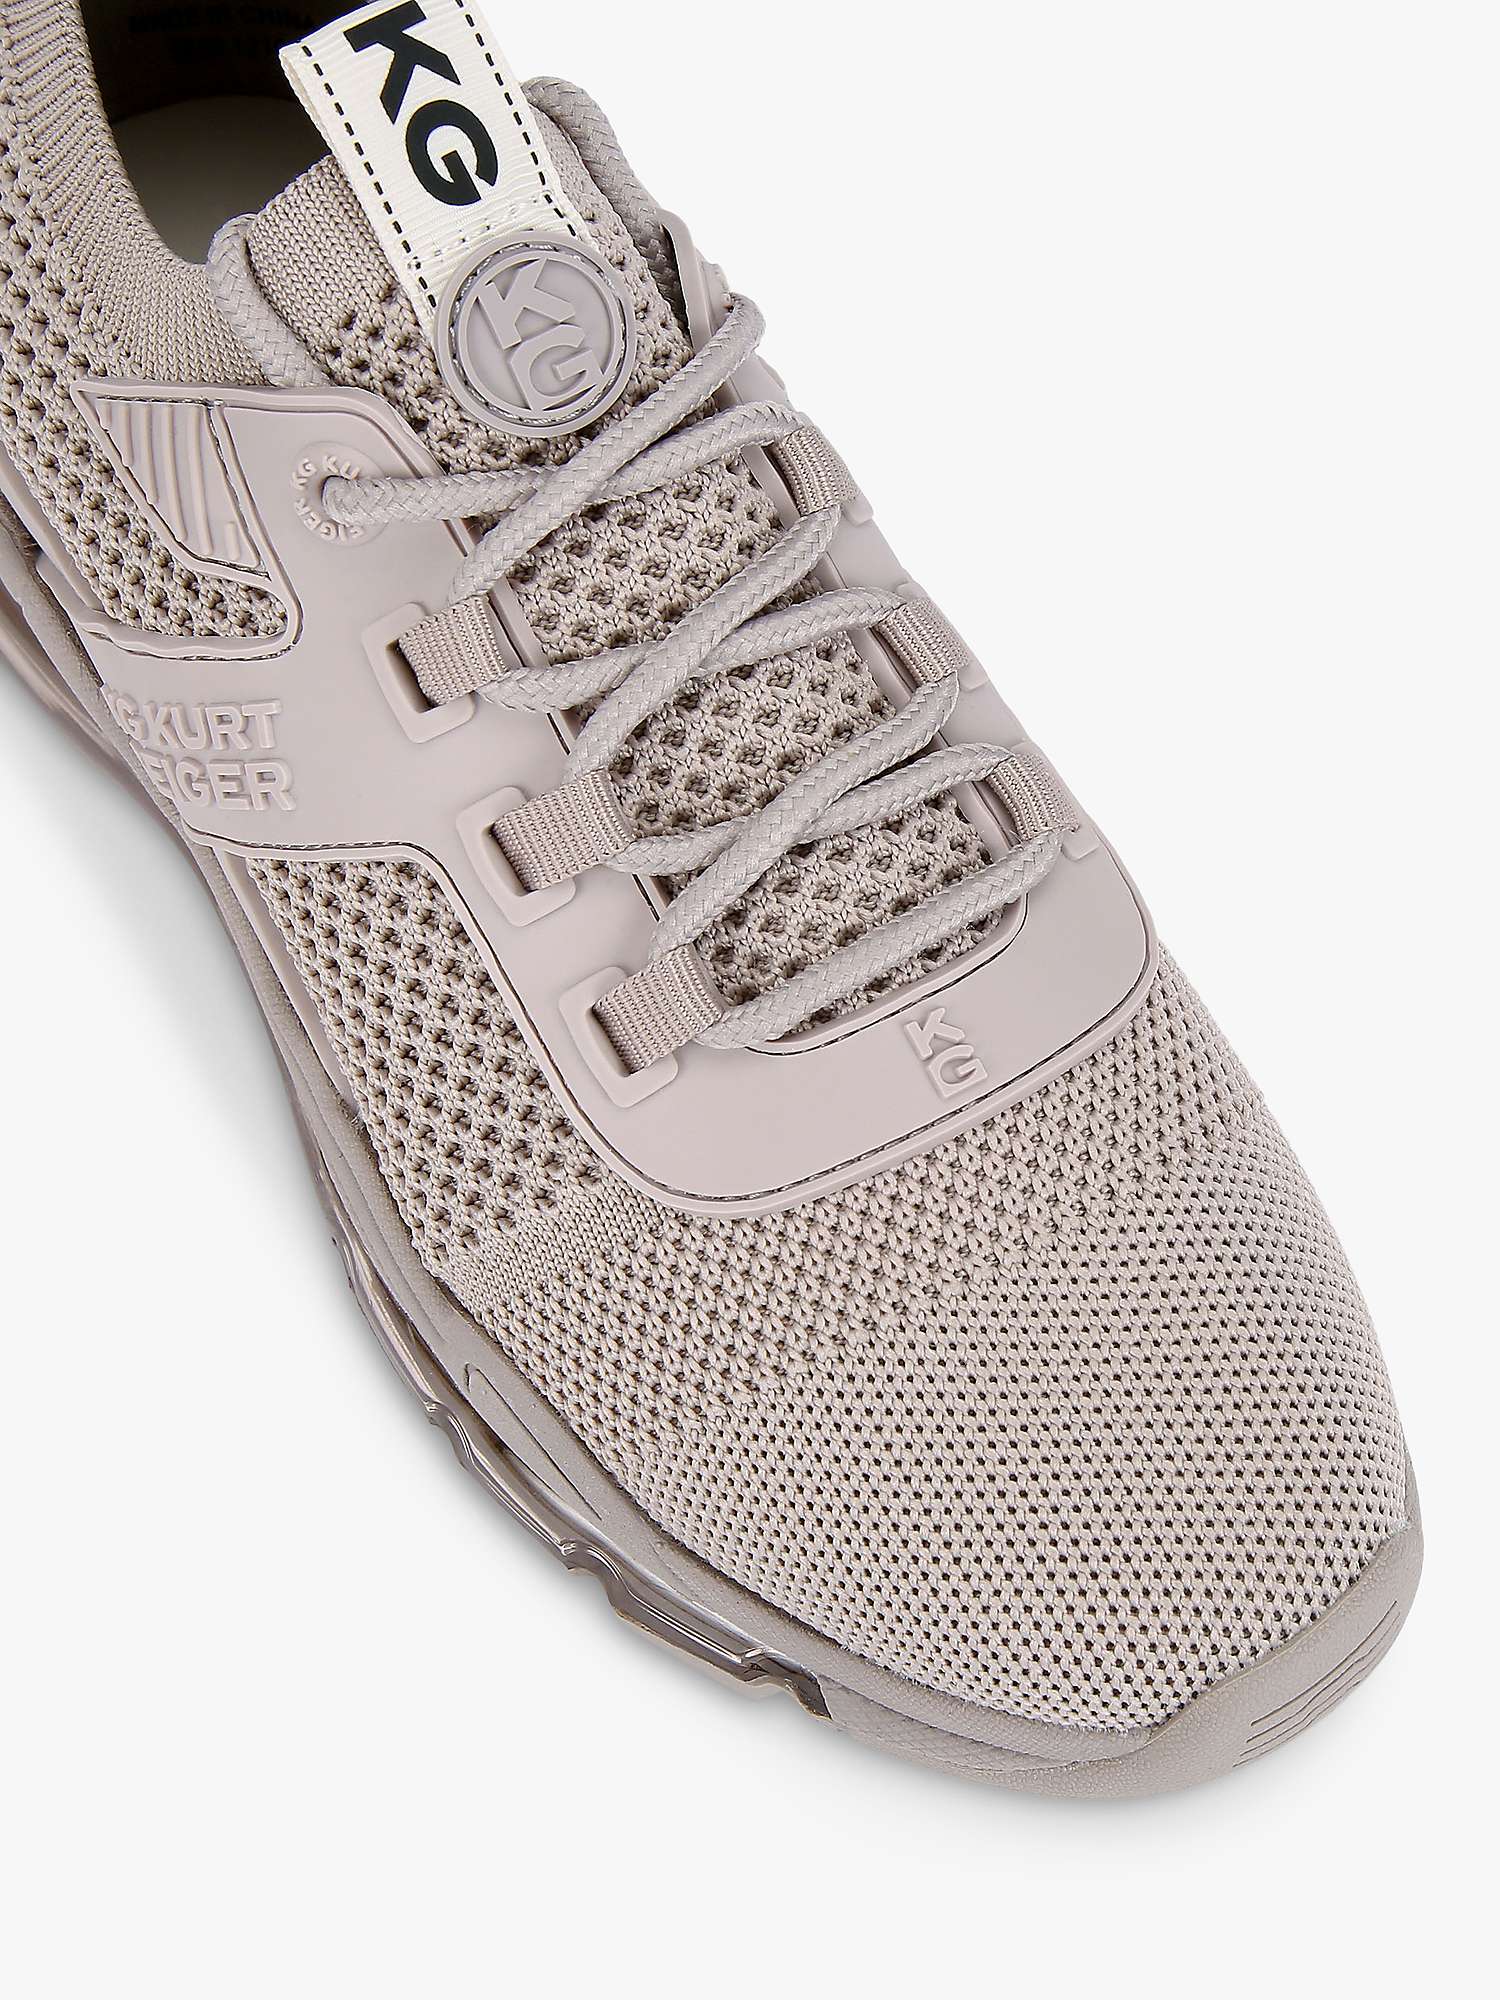 Buy KG Kurt Geiger Lena Knitted Trainers, Natural Taupe Online at johnlewis.com